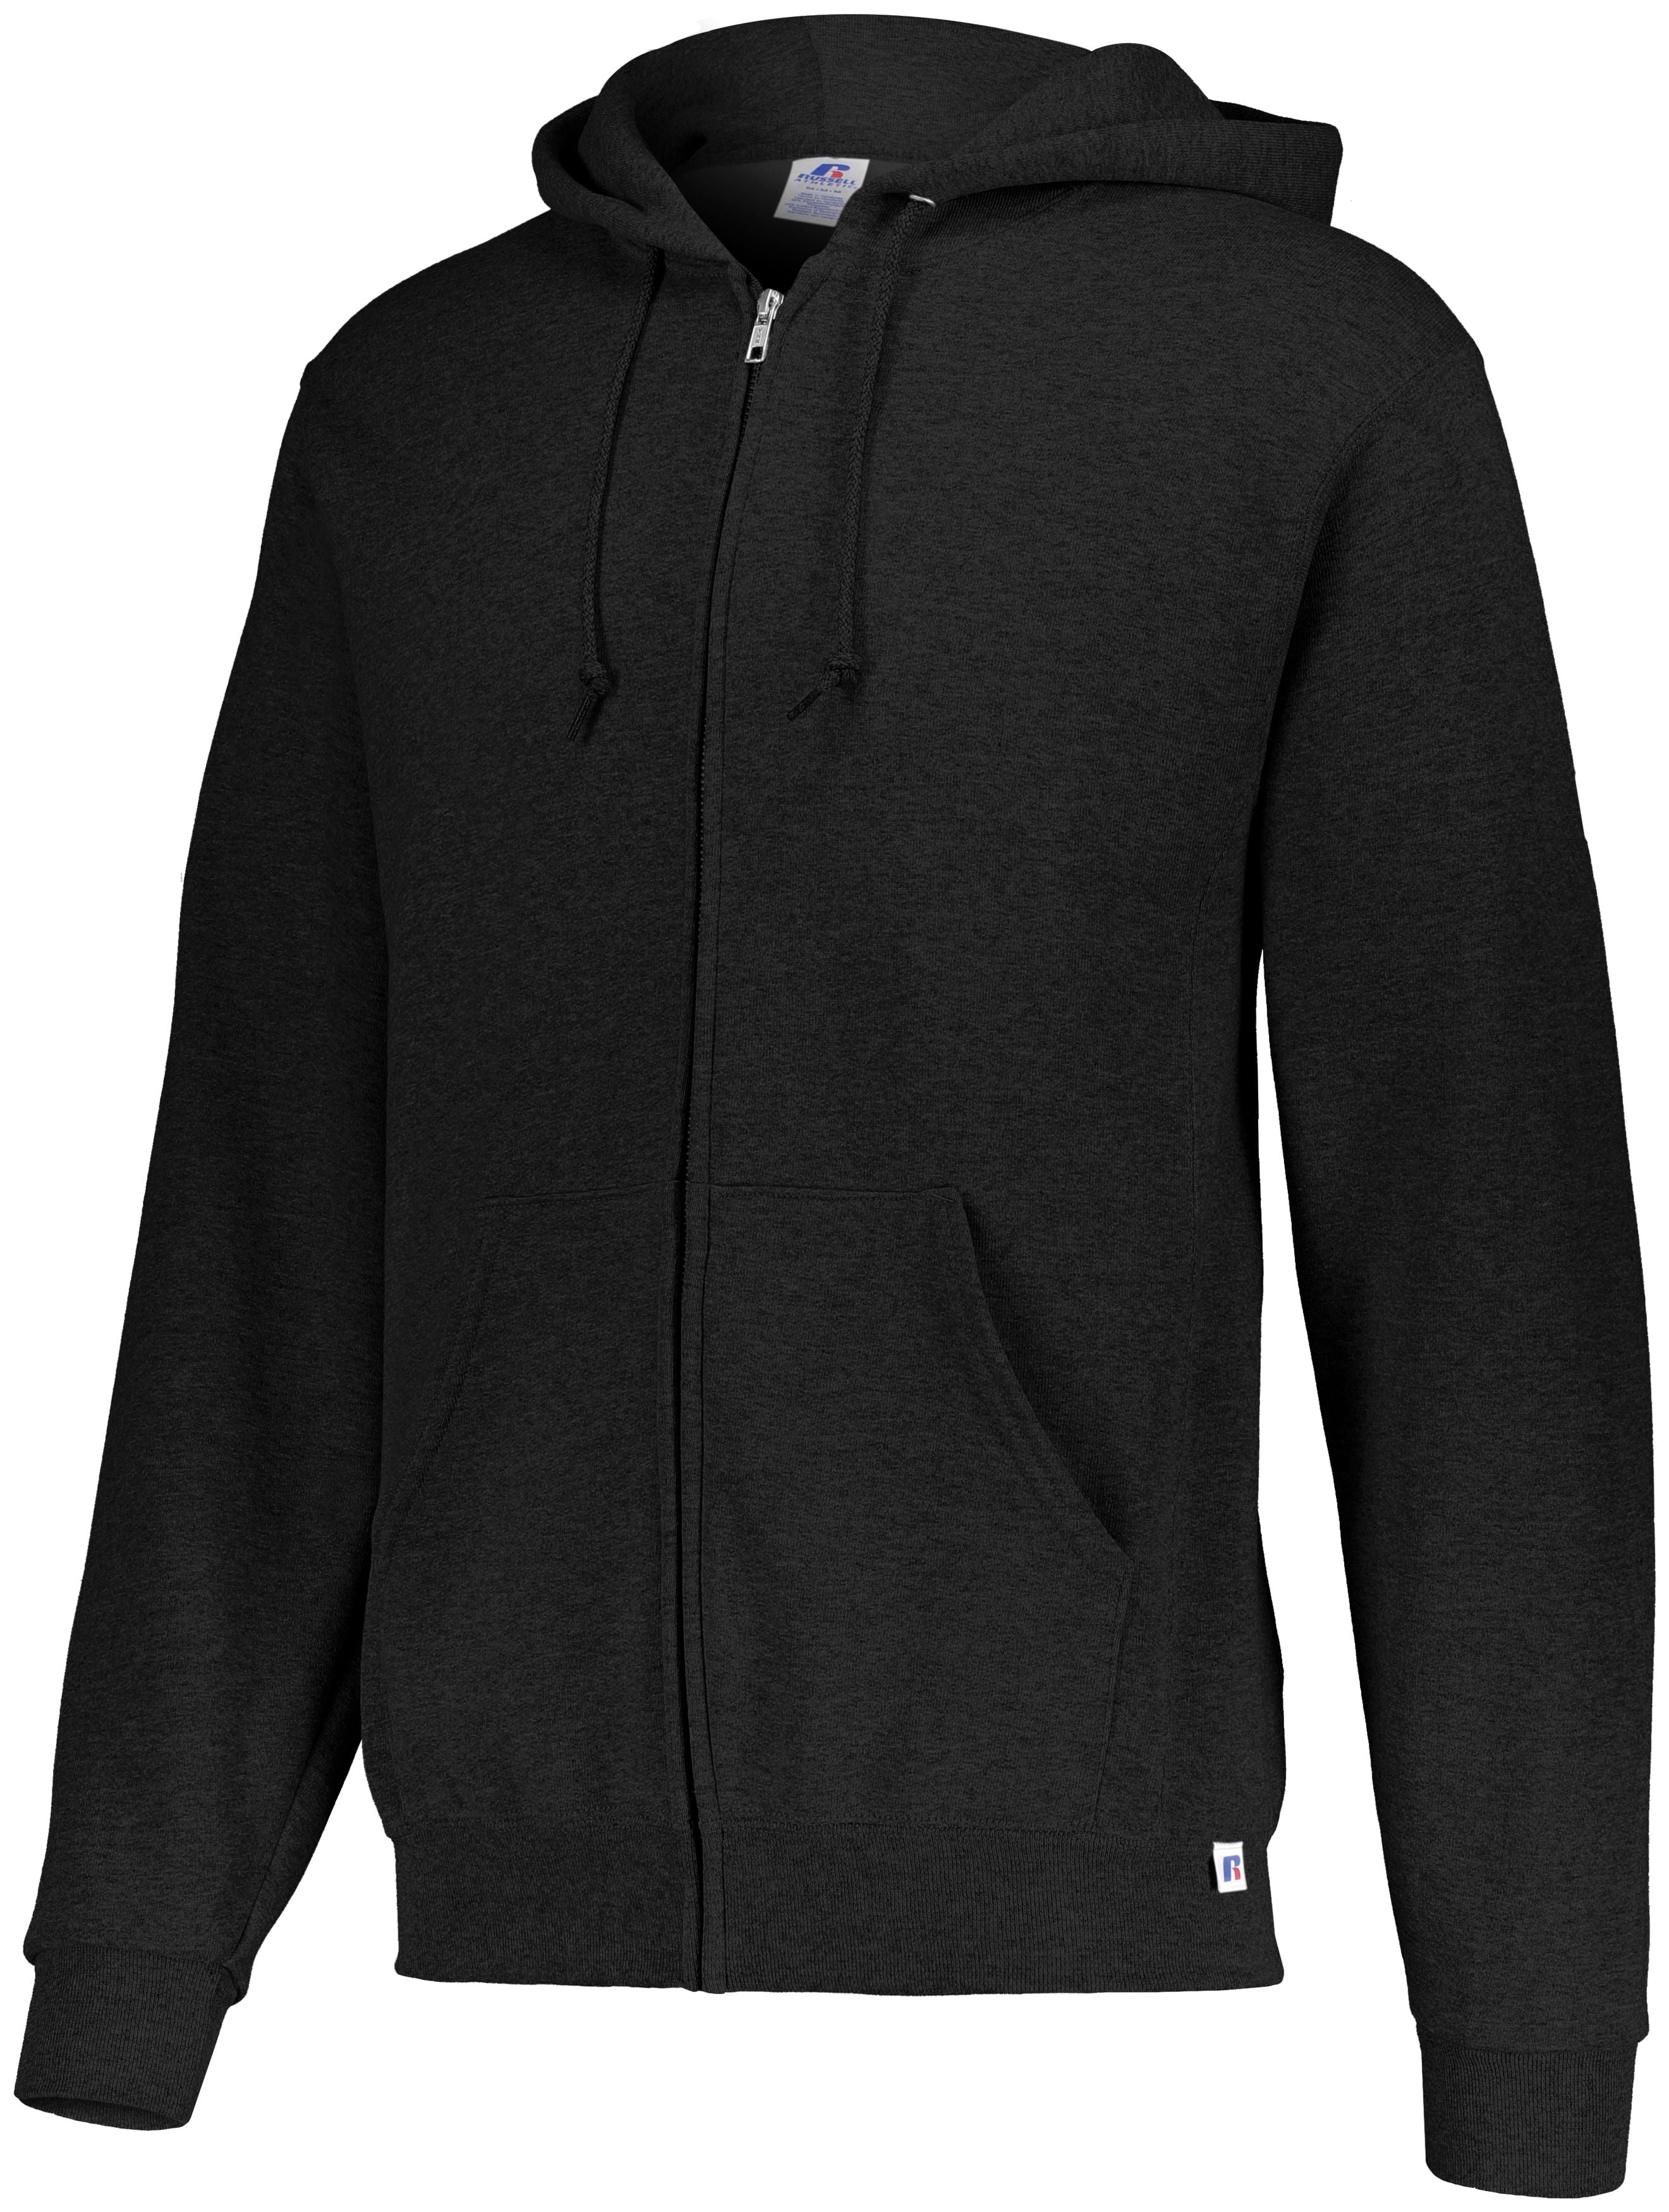 Russell Athletic Dri-Power Fleece Full-Zip Hoodie in Black  -Part of the Adult, Russell-Athletic-Products, Shirts product lines at KanaleyCreations.com